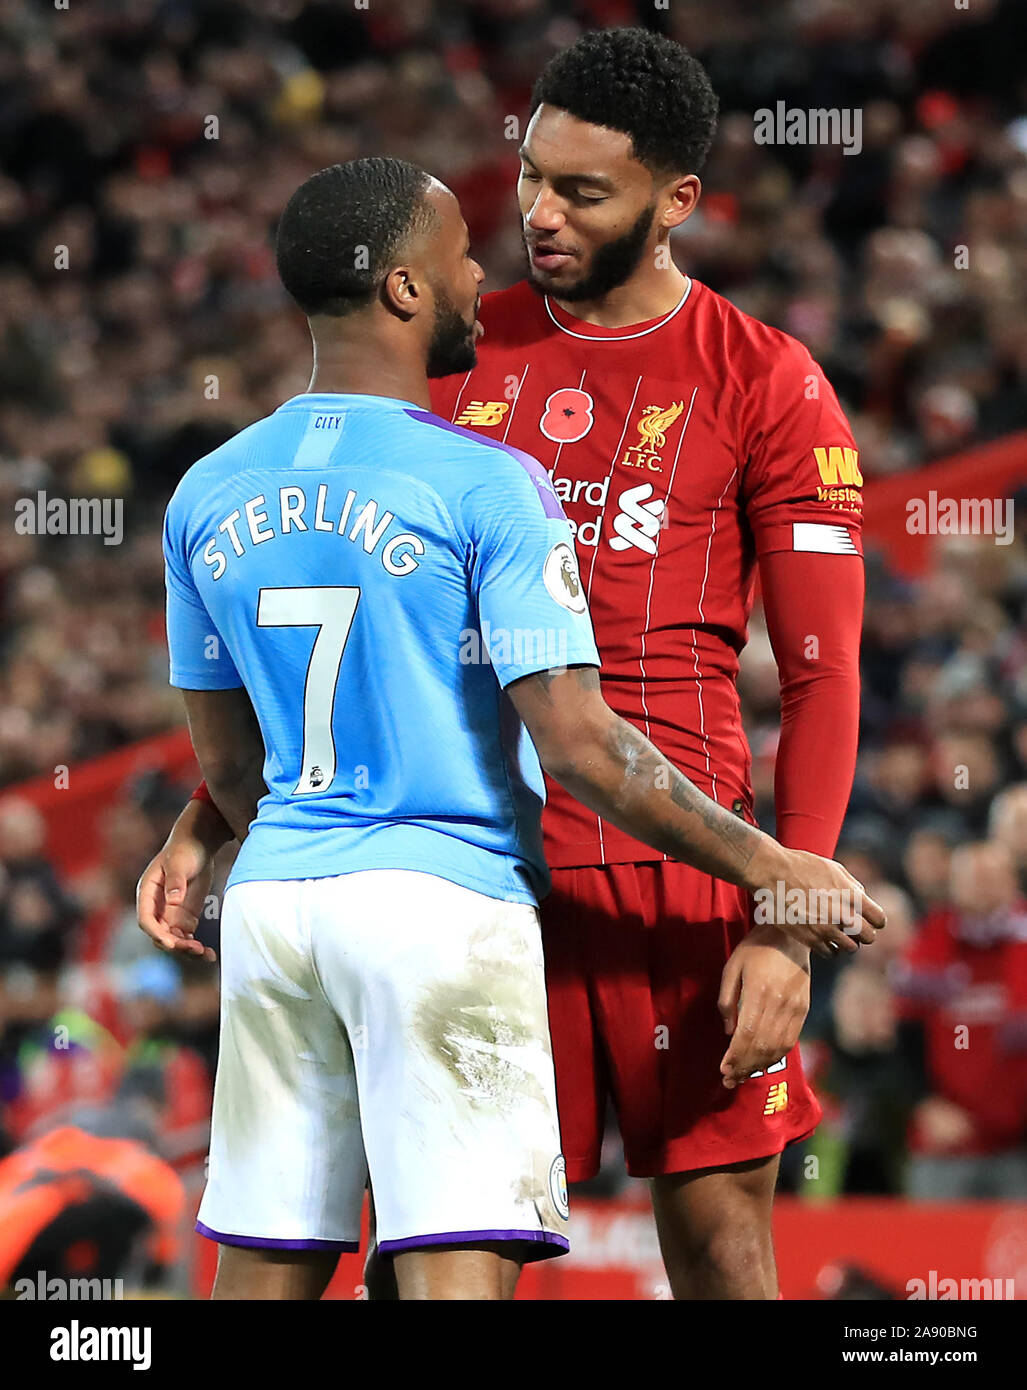 File photo dated 10-11-2019 of Liverpool's Joe Gomez (right) and Manchester City's Raheem Sterling clash during the Premier League match at Anfield, Liverpool. Stock Photo